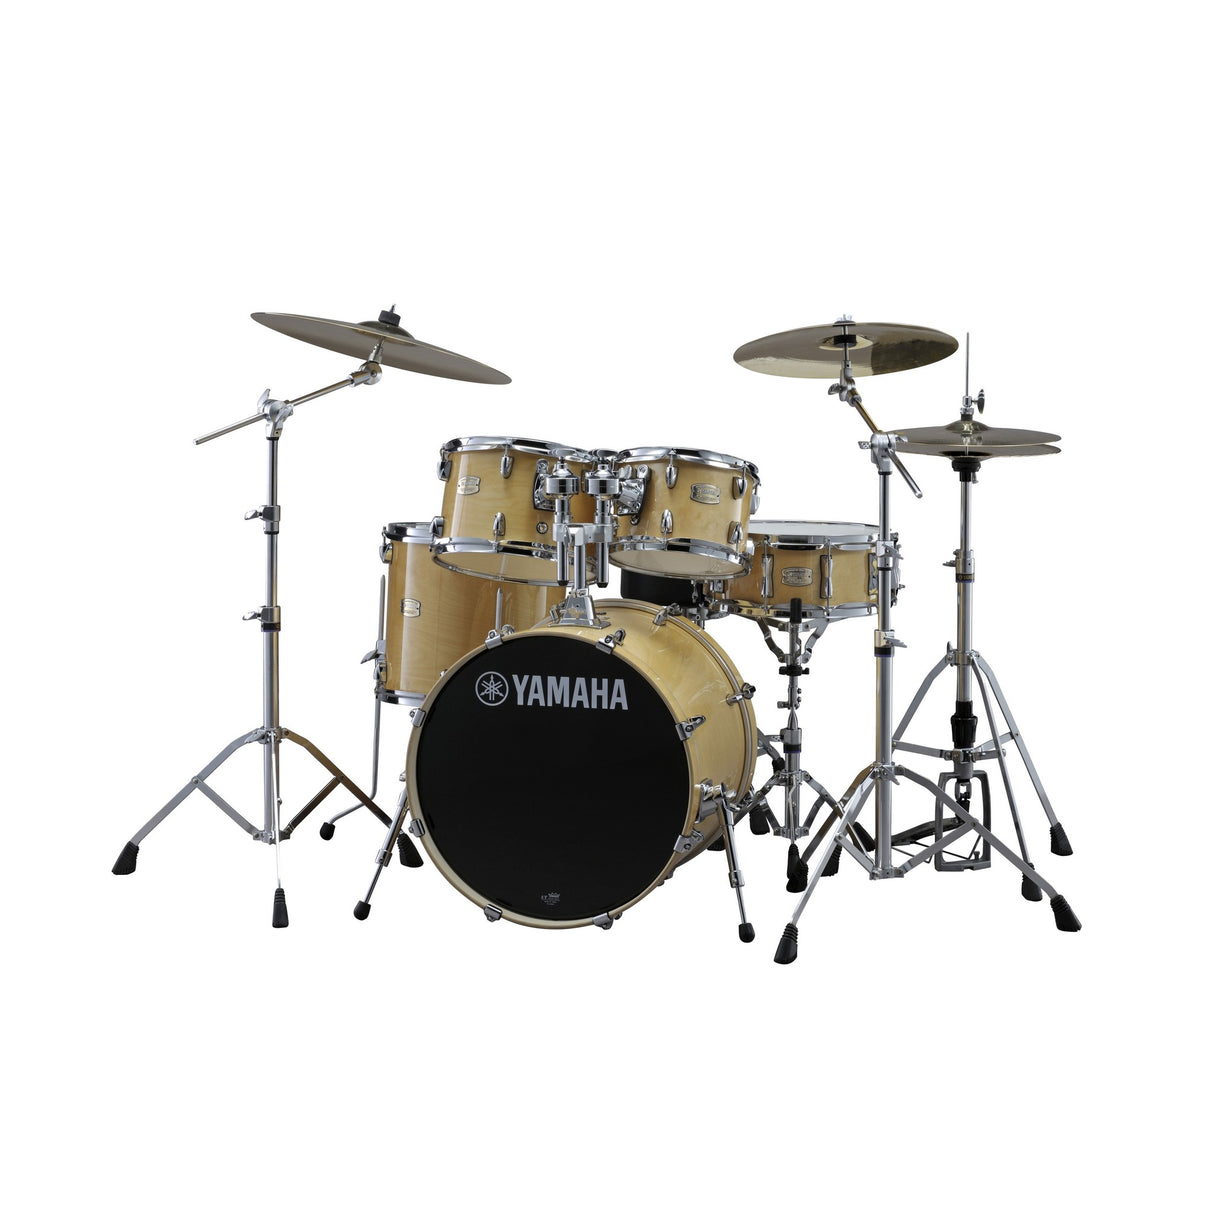 Yamaha Stage Custom Birch Shell Acoustic Drum Set with HW-680W Hardware Pack, Natural Wood